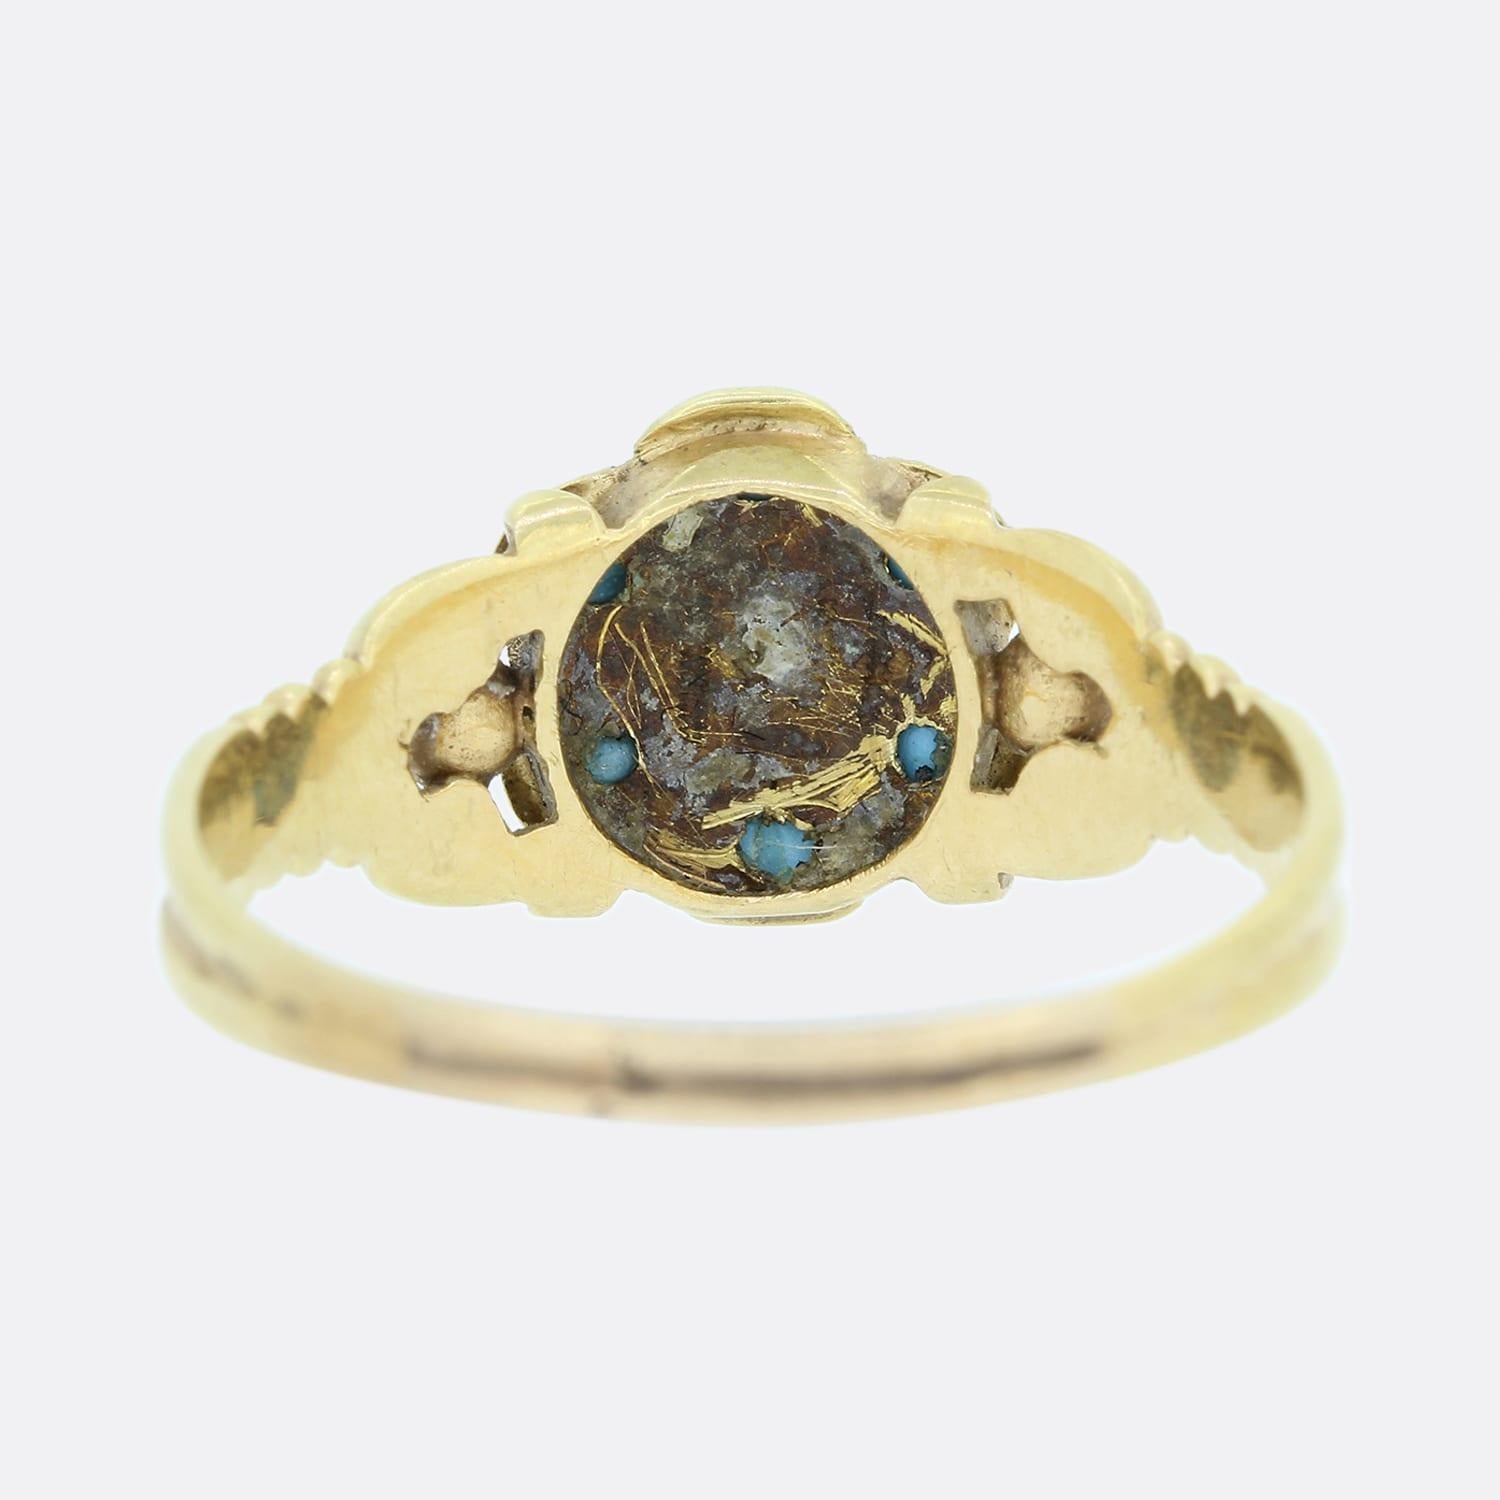 Taille ronde Bague grappe victorienne turquoise « Forget Me Not » en vente